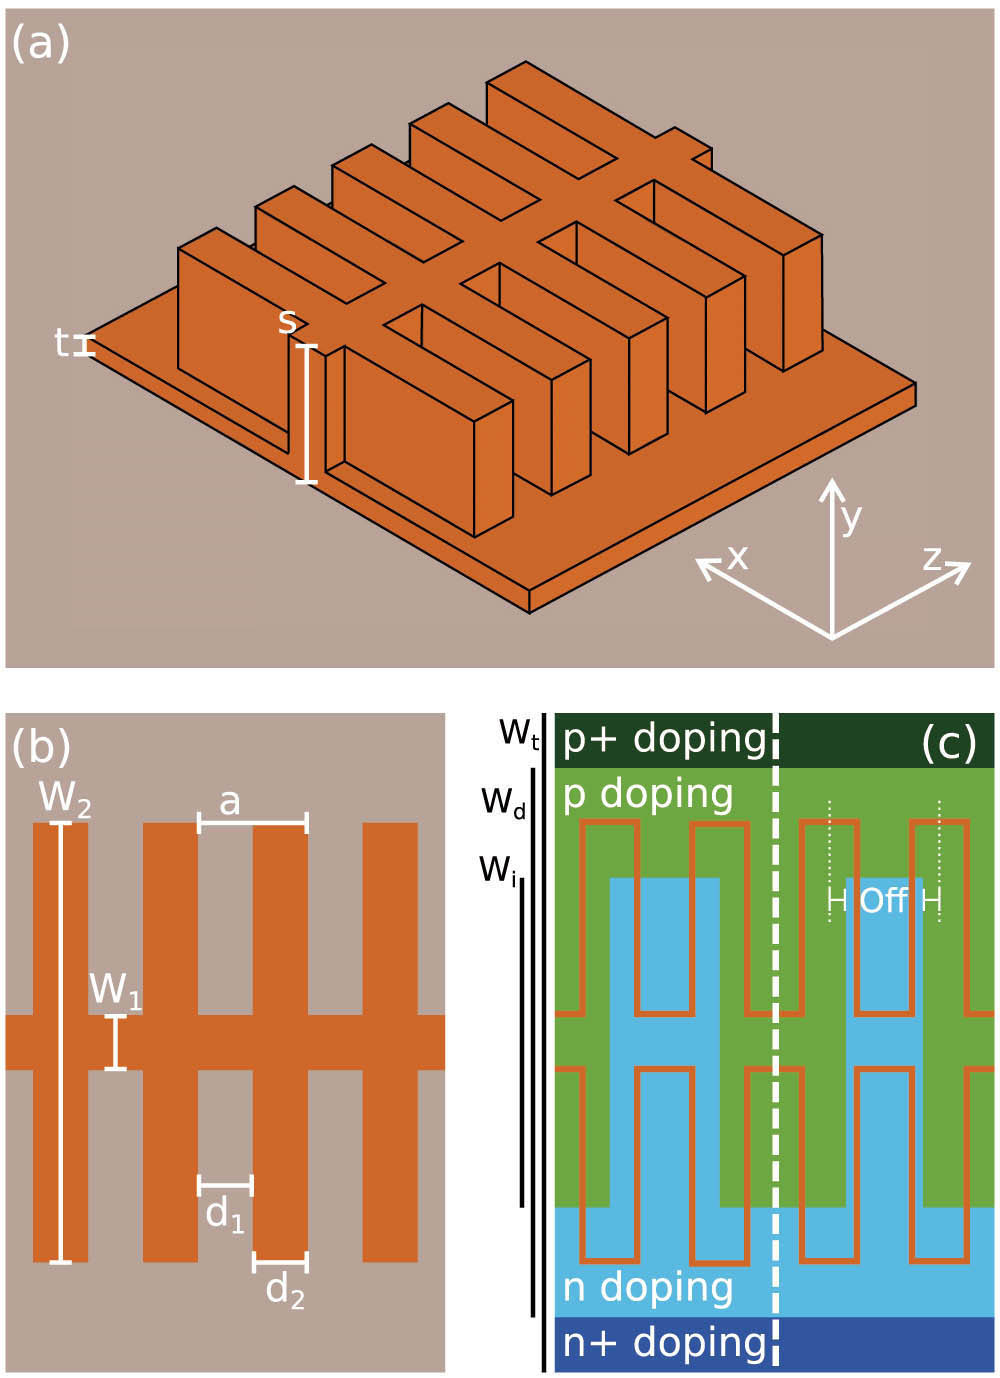 Schematic of the slow-light waveguide with definition of the structure (a) in 3D and (b) in top view with grating parameters and (c) doping profiles. The silicon material in (a) and (b) (orange) is fully embedded in SiO2 (gray). In panel (c), the boundary between p and n regions, which is perpendicular to the waveguide axis, can be either placed at the center of the wide grating section (left part) or displaced along the waveguide direction by the parameter Off (right part).